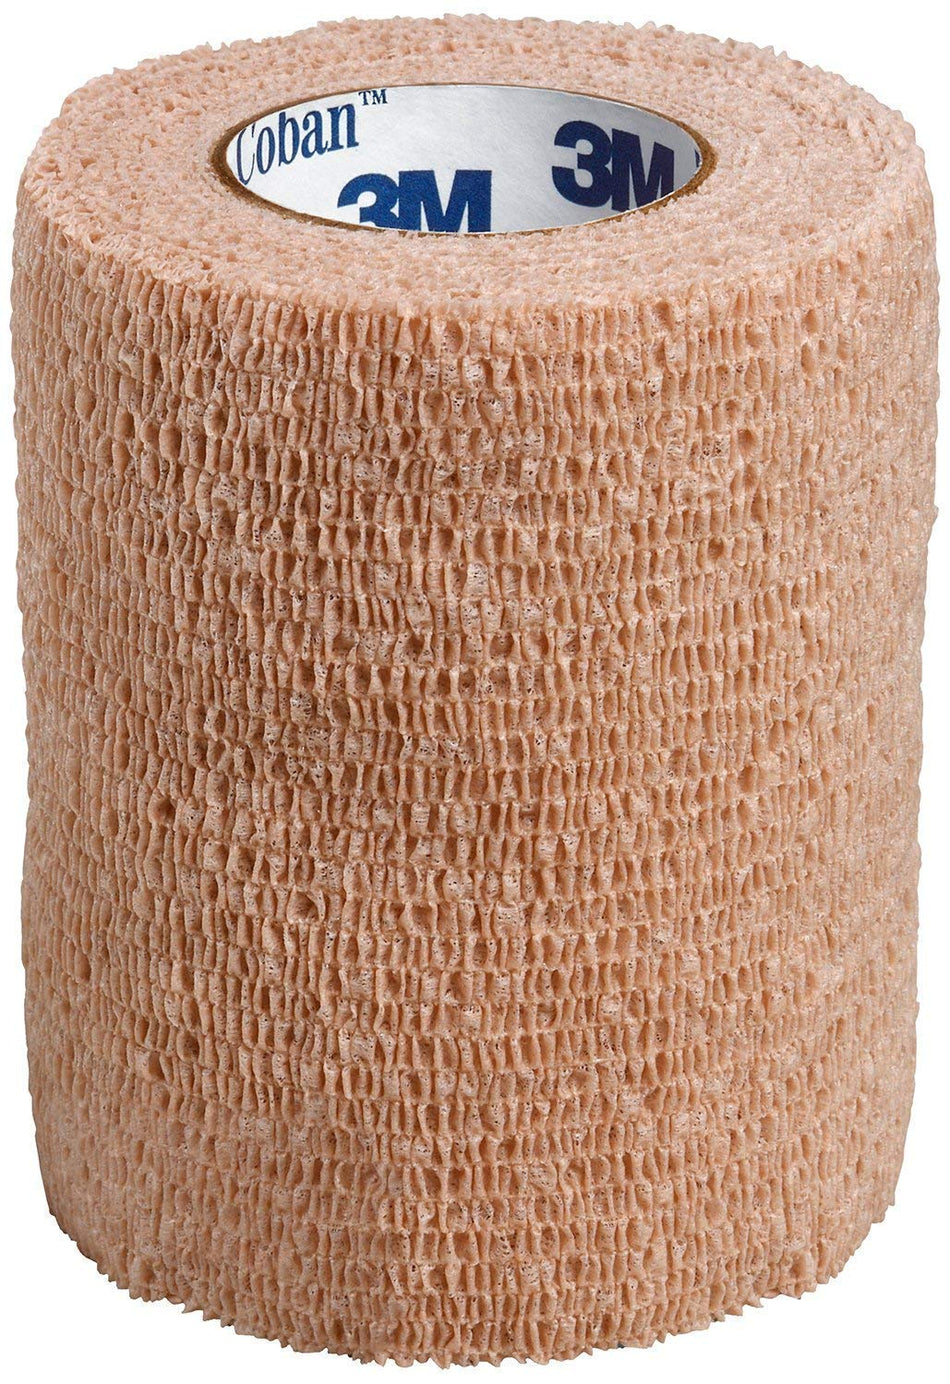 Code 1 Supply 3M 1583 Coban Self-Adherent Wrap 3 in. x 5 yd. (One Roll)